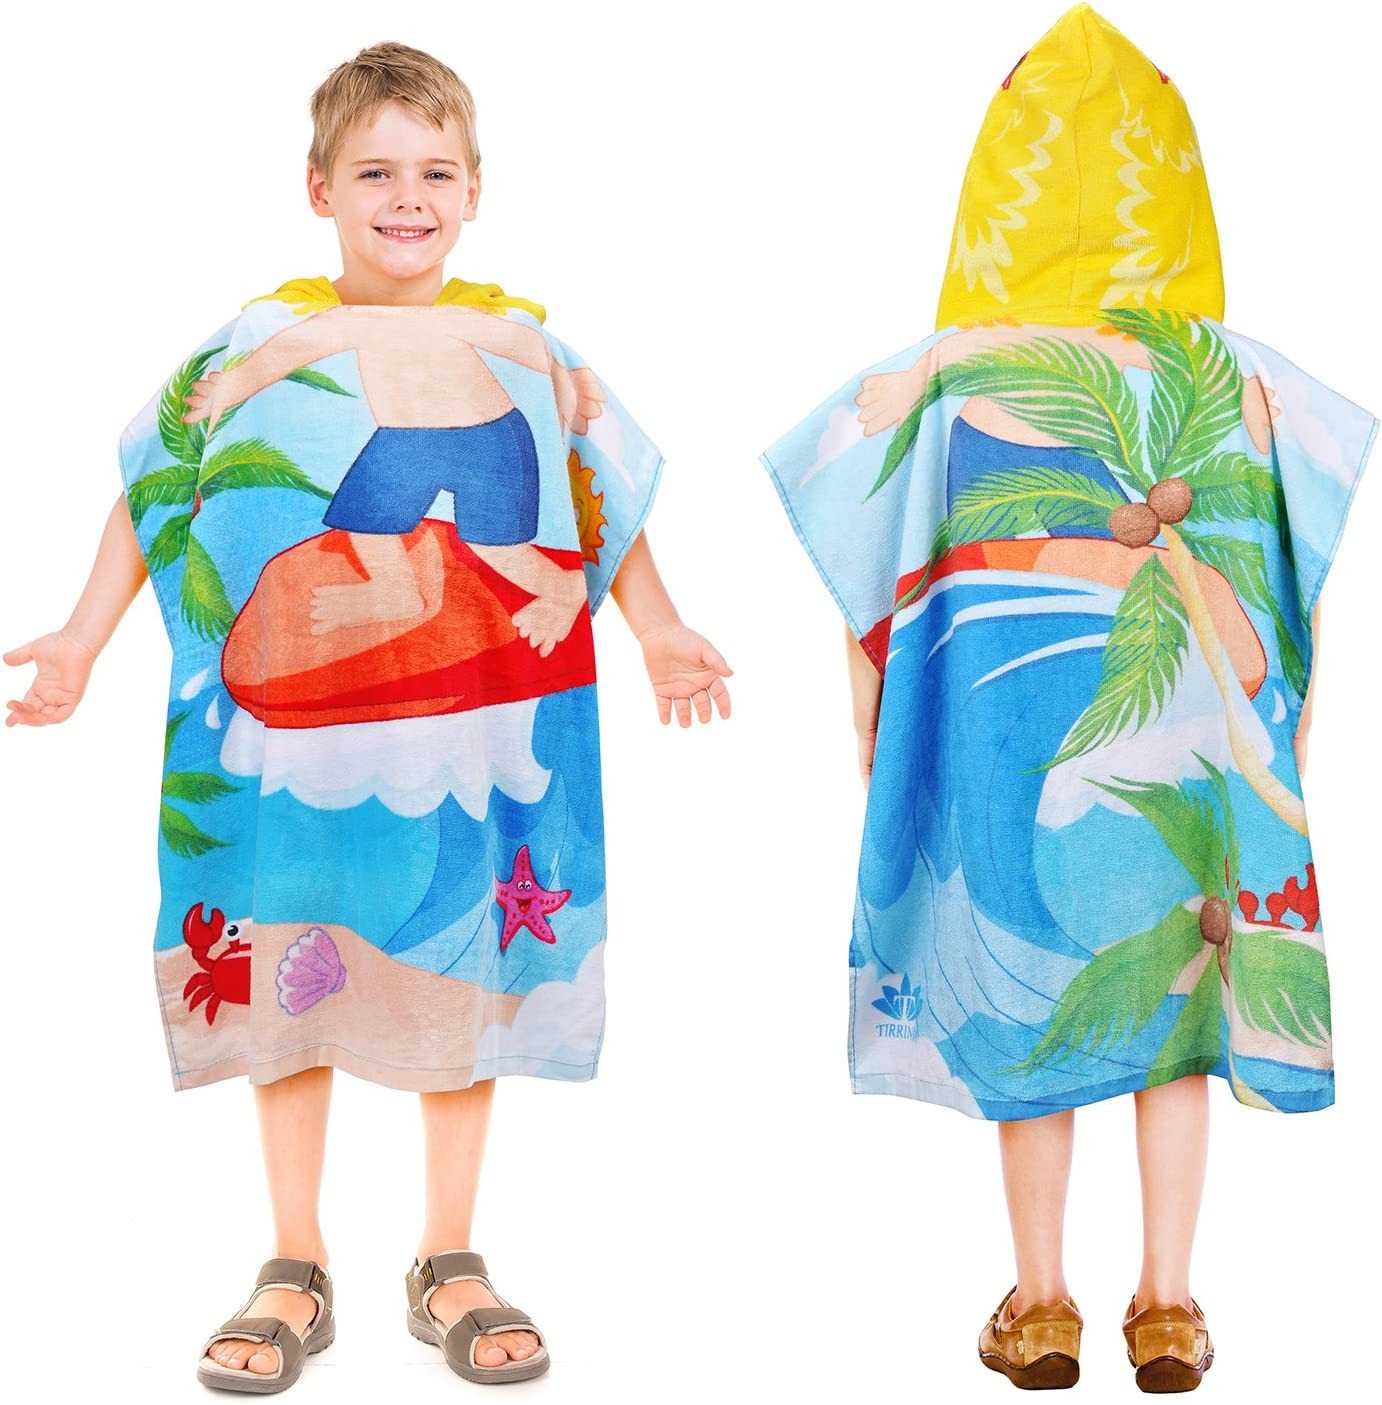 Catalonia Kids Beach Towel,100% Cotton Water Absorption Hooded Bath Changing Rob